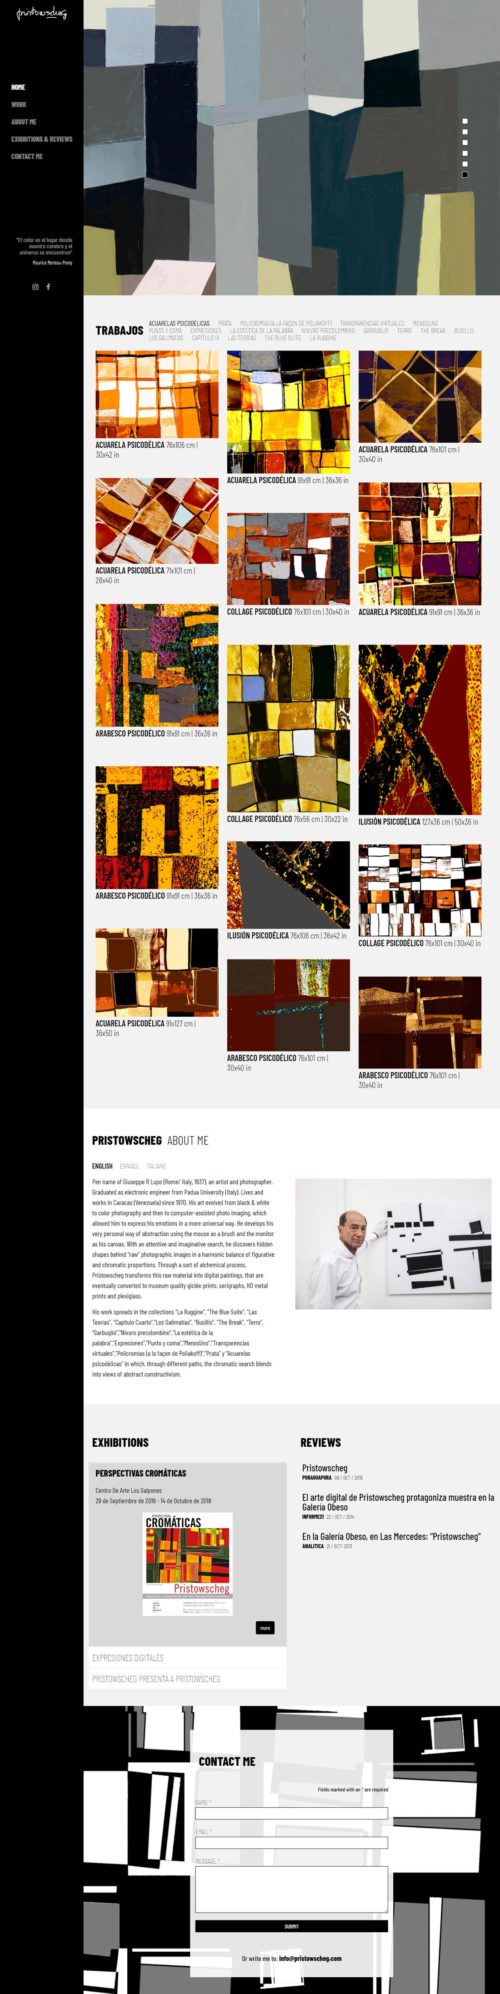 Pristowscheg | Portfolio of Pristowscheg, digital plastic artist. Site with infinite scroll developed for WordPress, in English with mansory, bootstrap and sass.